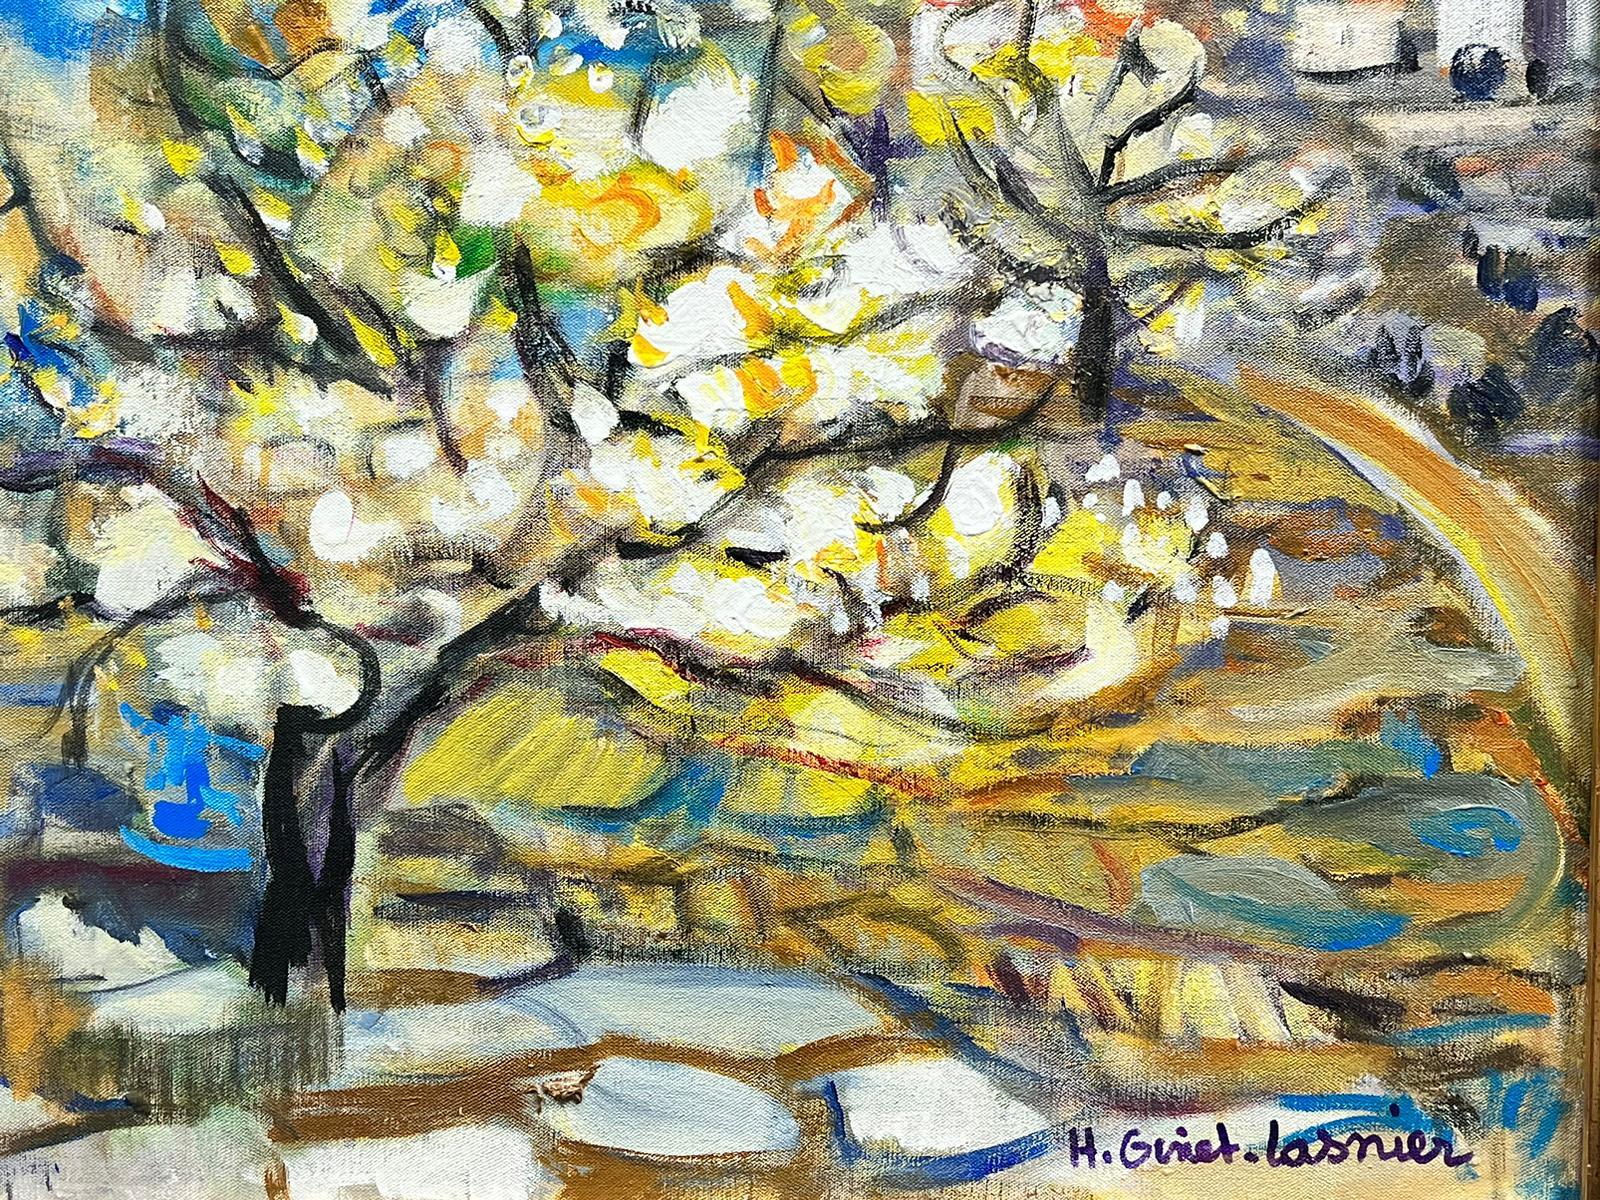 Blossom Trees
Huguette Ginet-Lasnier (French 1927-2020)
signed
framed
oil painting on canvas
framed: 23.5 x 28 inches
canvas: 20 x 24 inches.
All the paintings we have for sale by this artist have come from the artists estate in France.
The painting